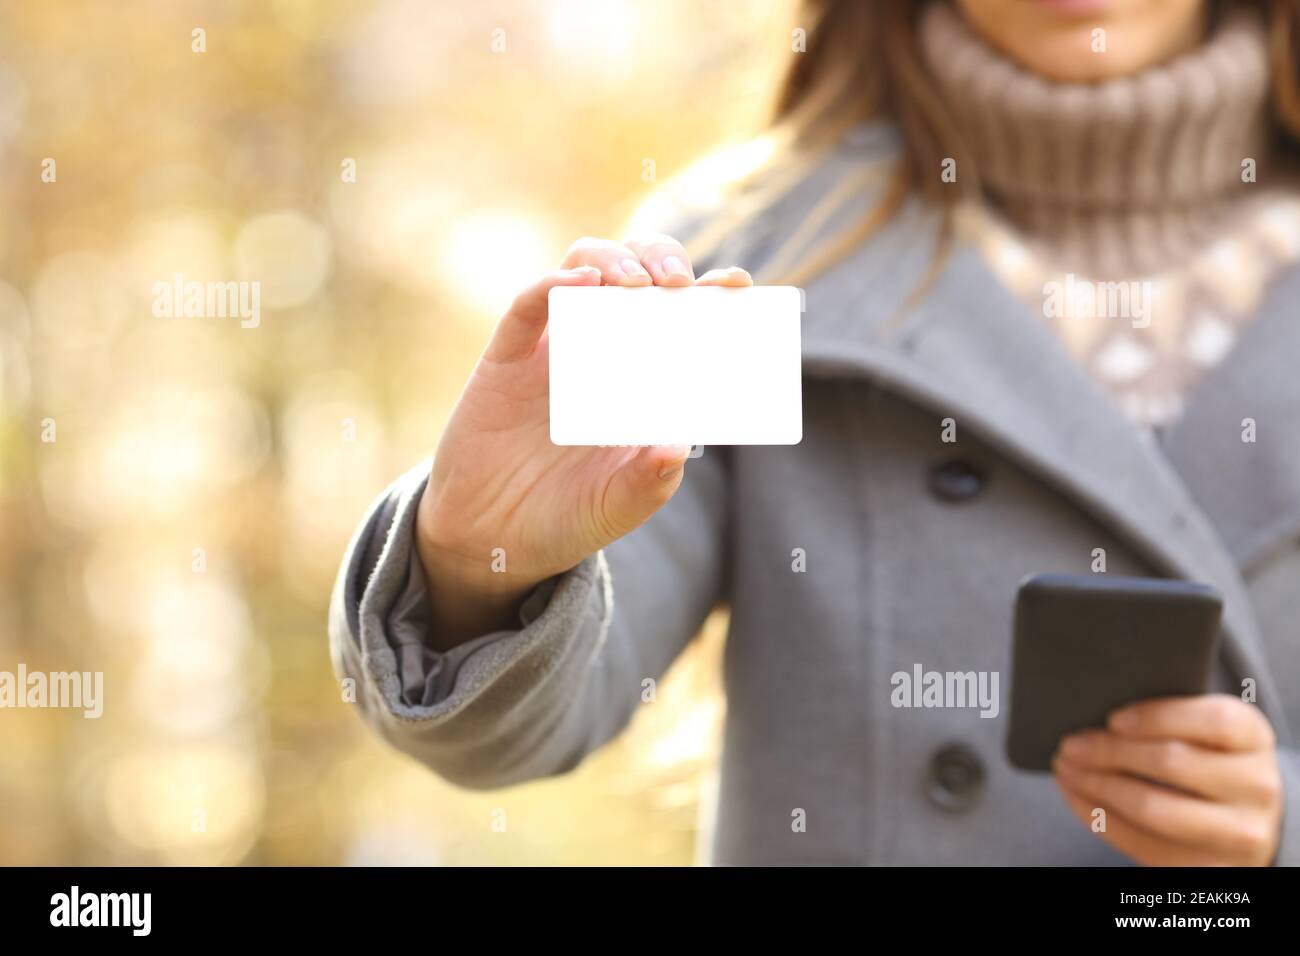 Woman hands holding phone and showing credit card in fall Stock Photo